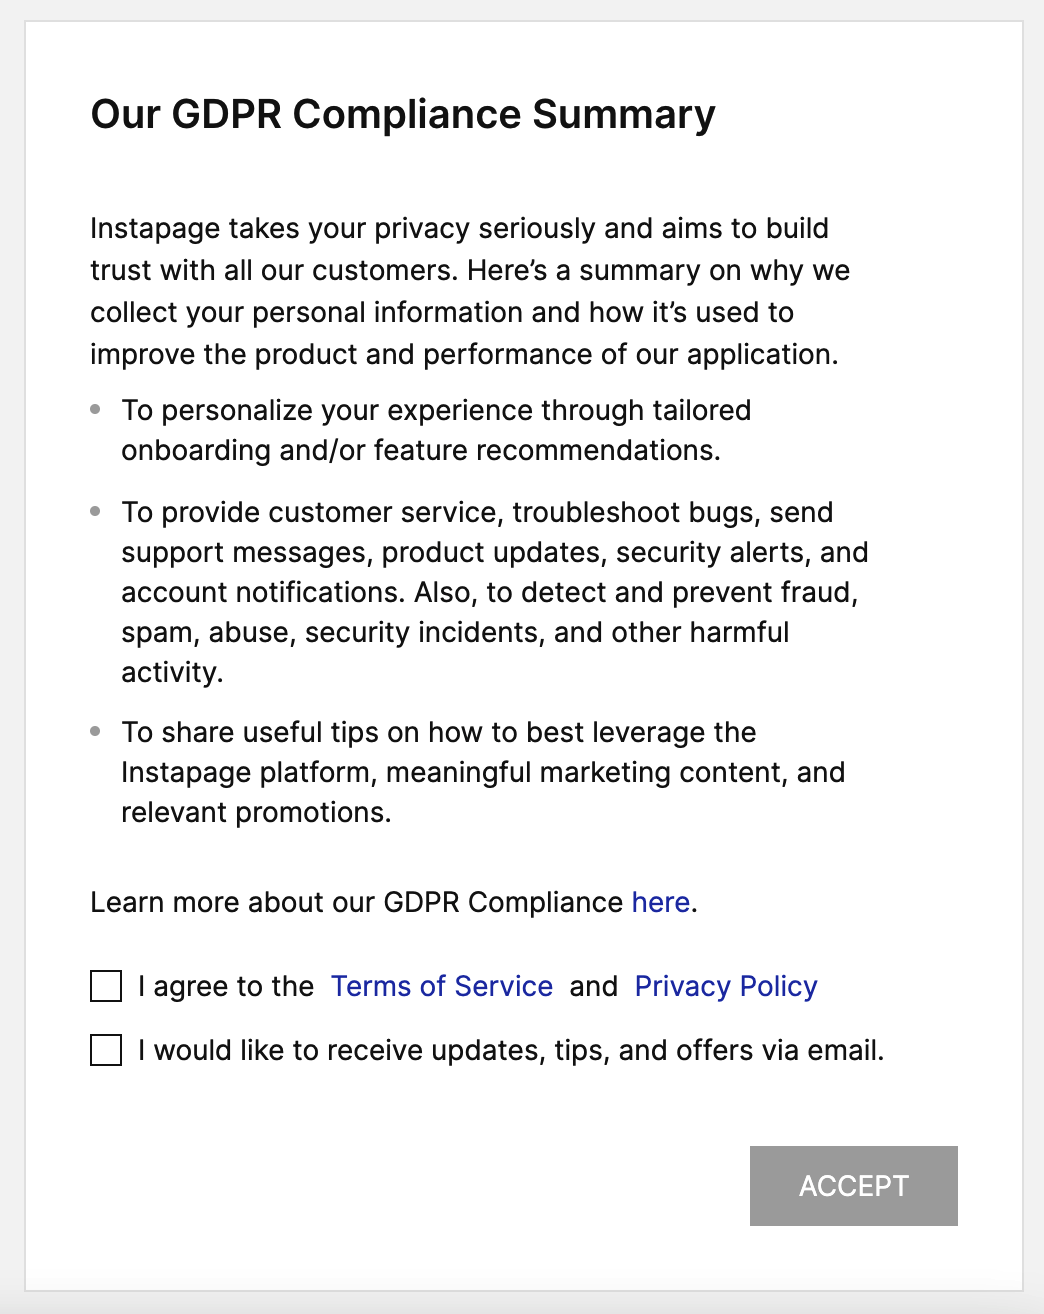 GDPR information and consent checkboxes